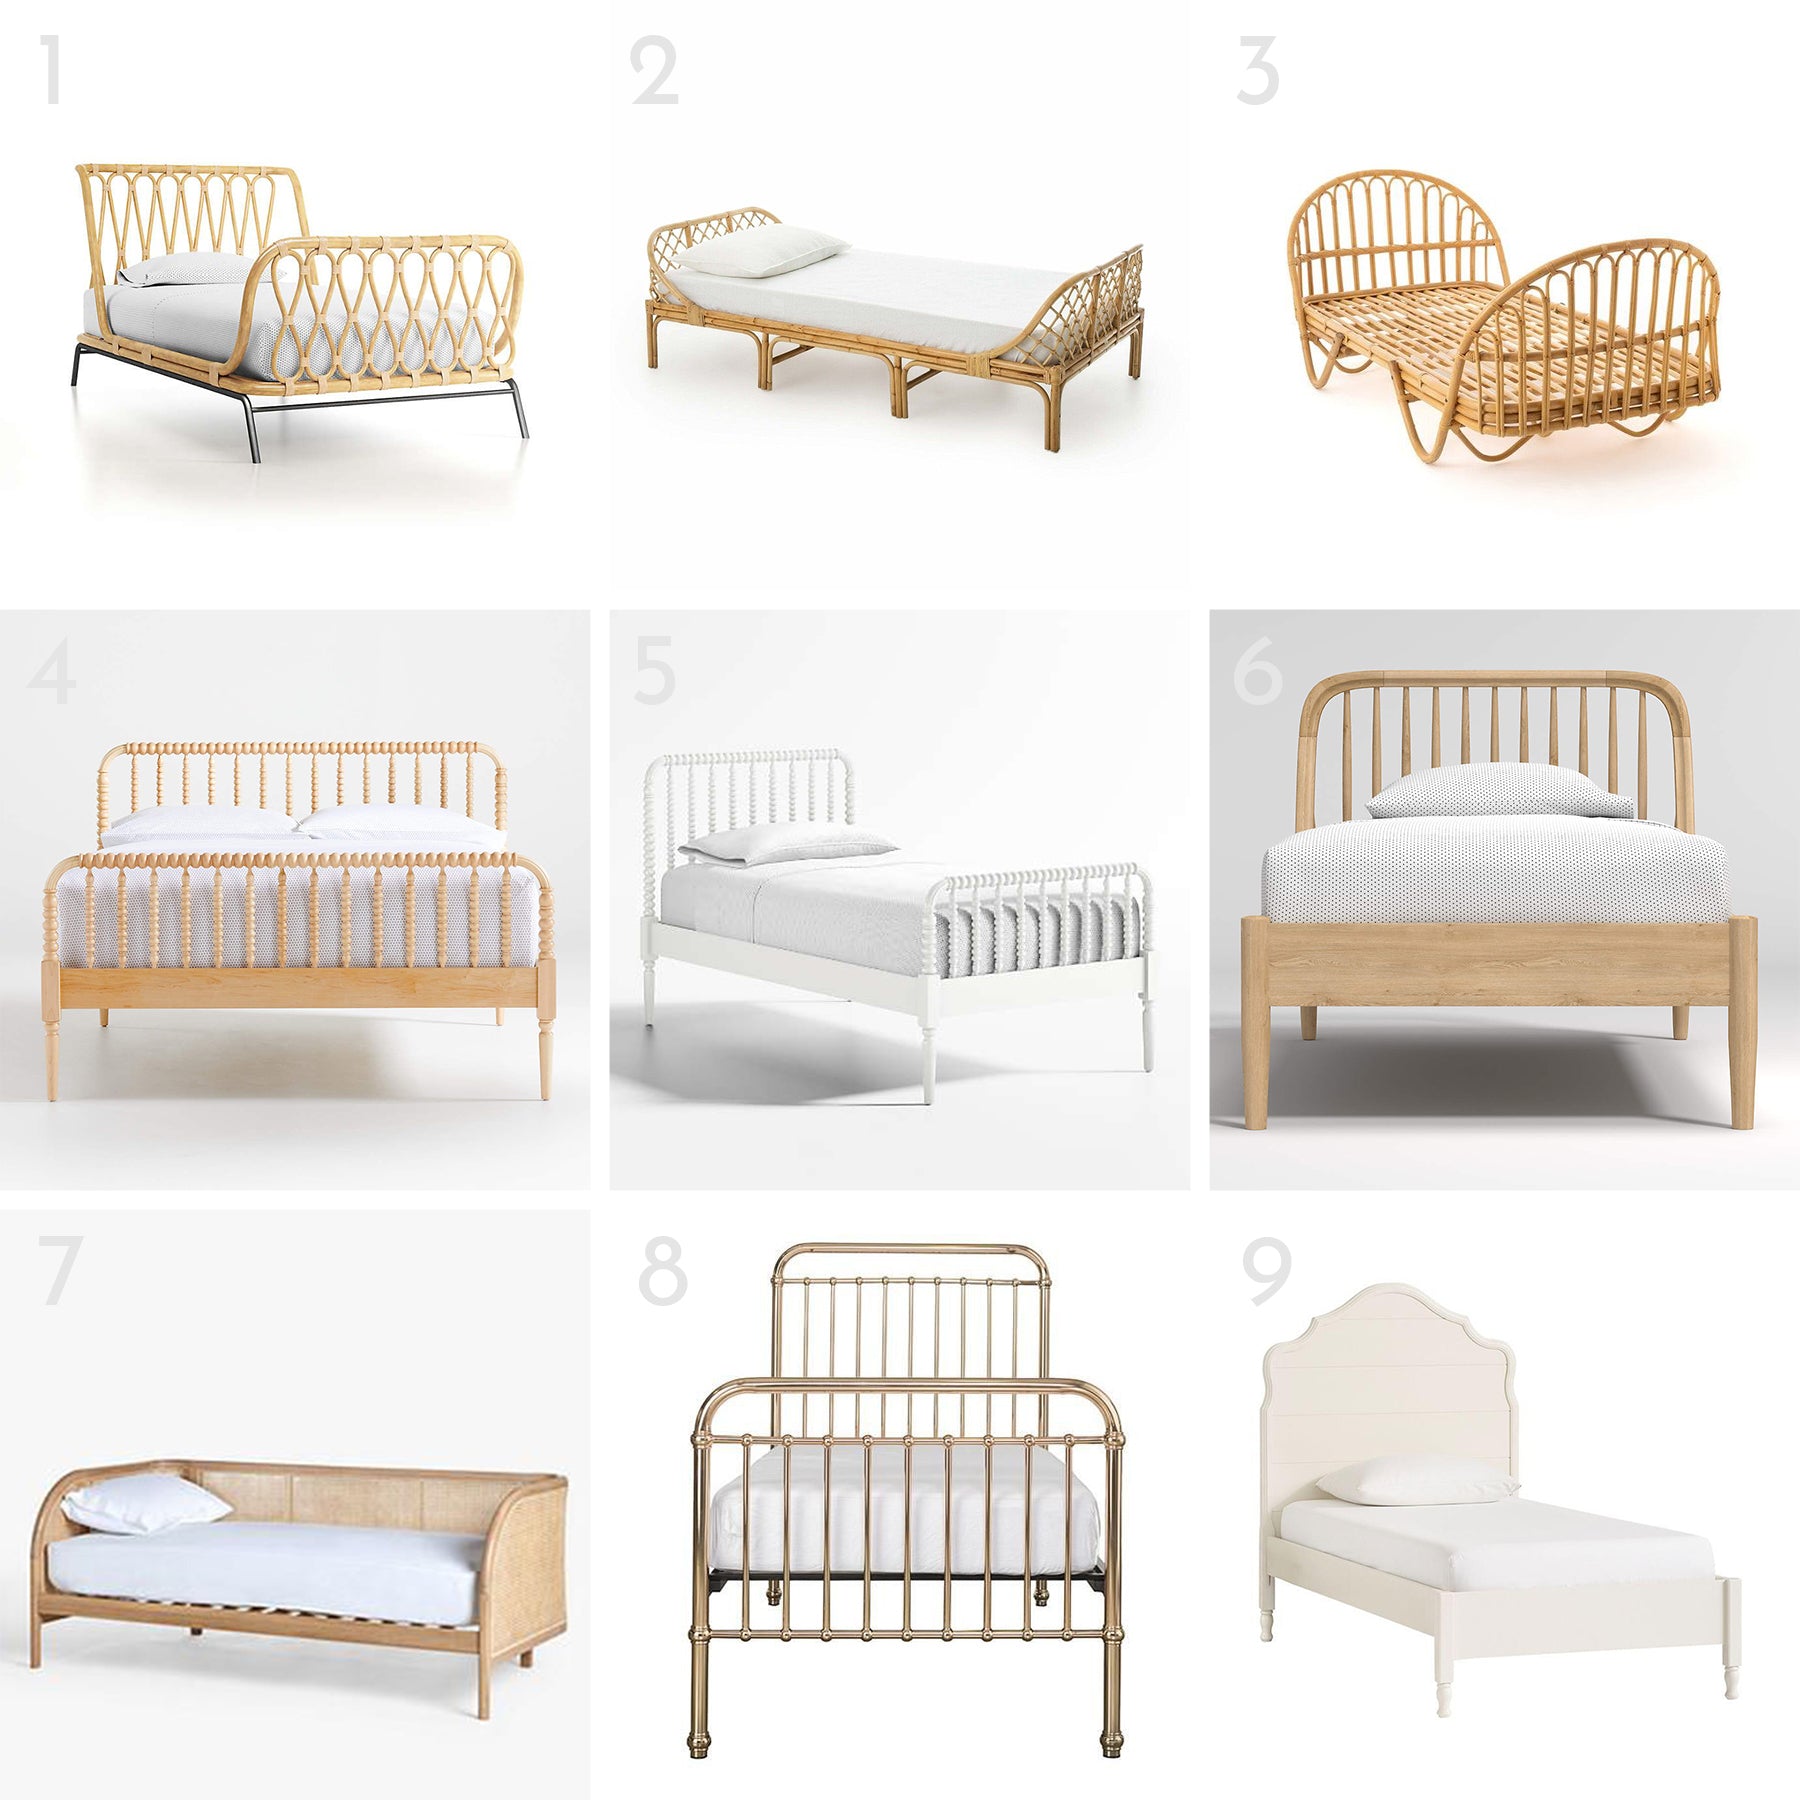 beds-for-kids-childs-bed-toddler-bed-single-bed-for-children-room-rattan-kids-bed-spool-childs-bed-wooden-bed-toddler-best-beds-for-kids-2